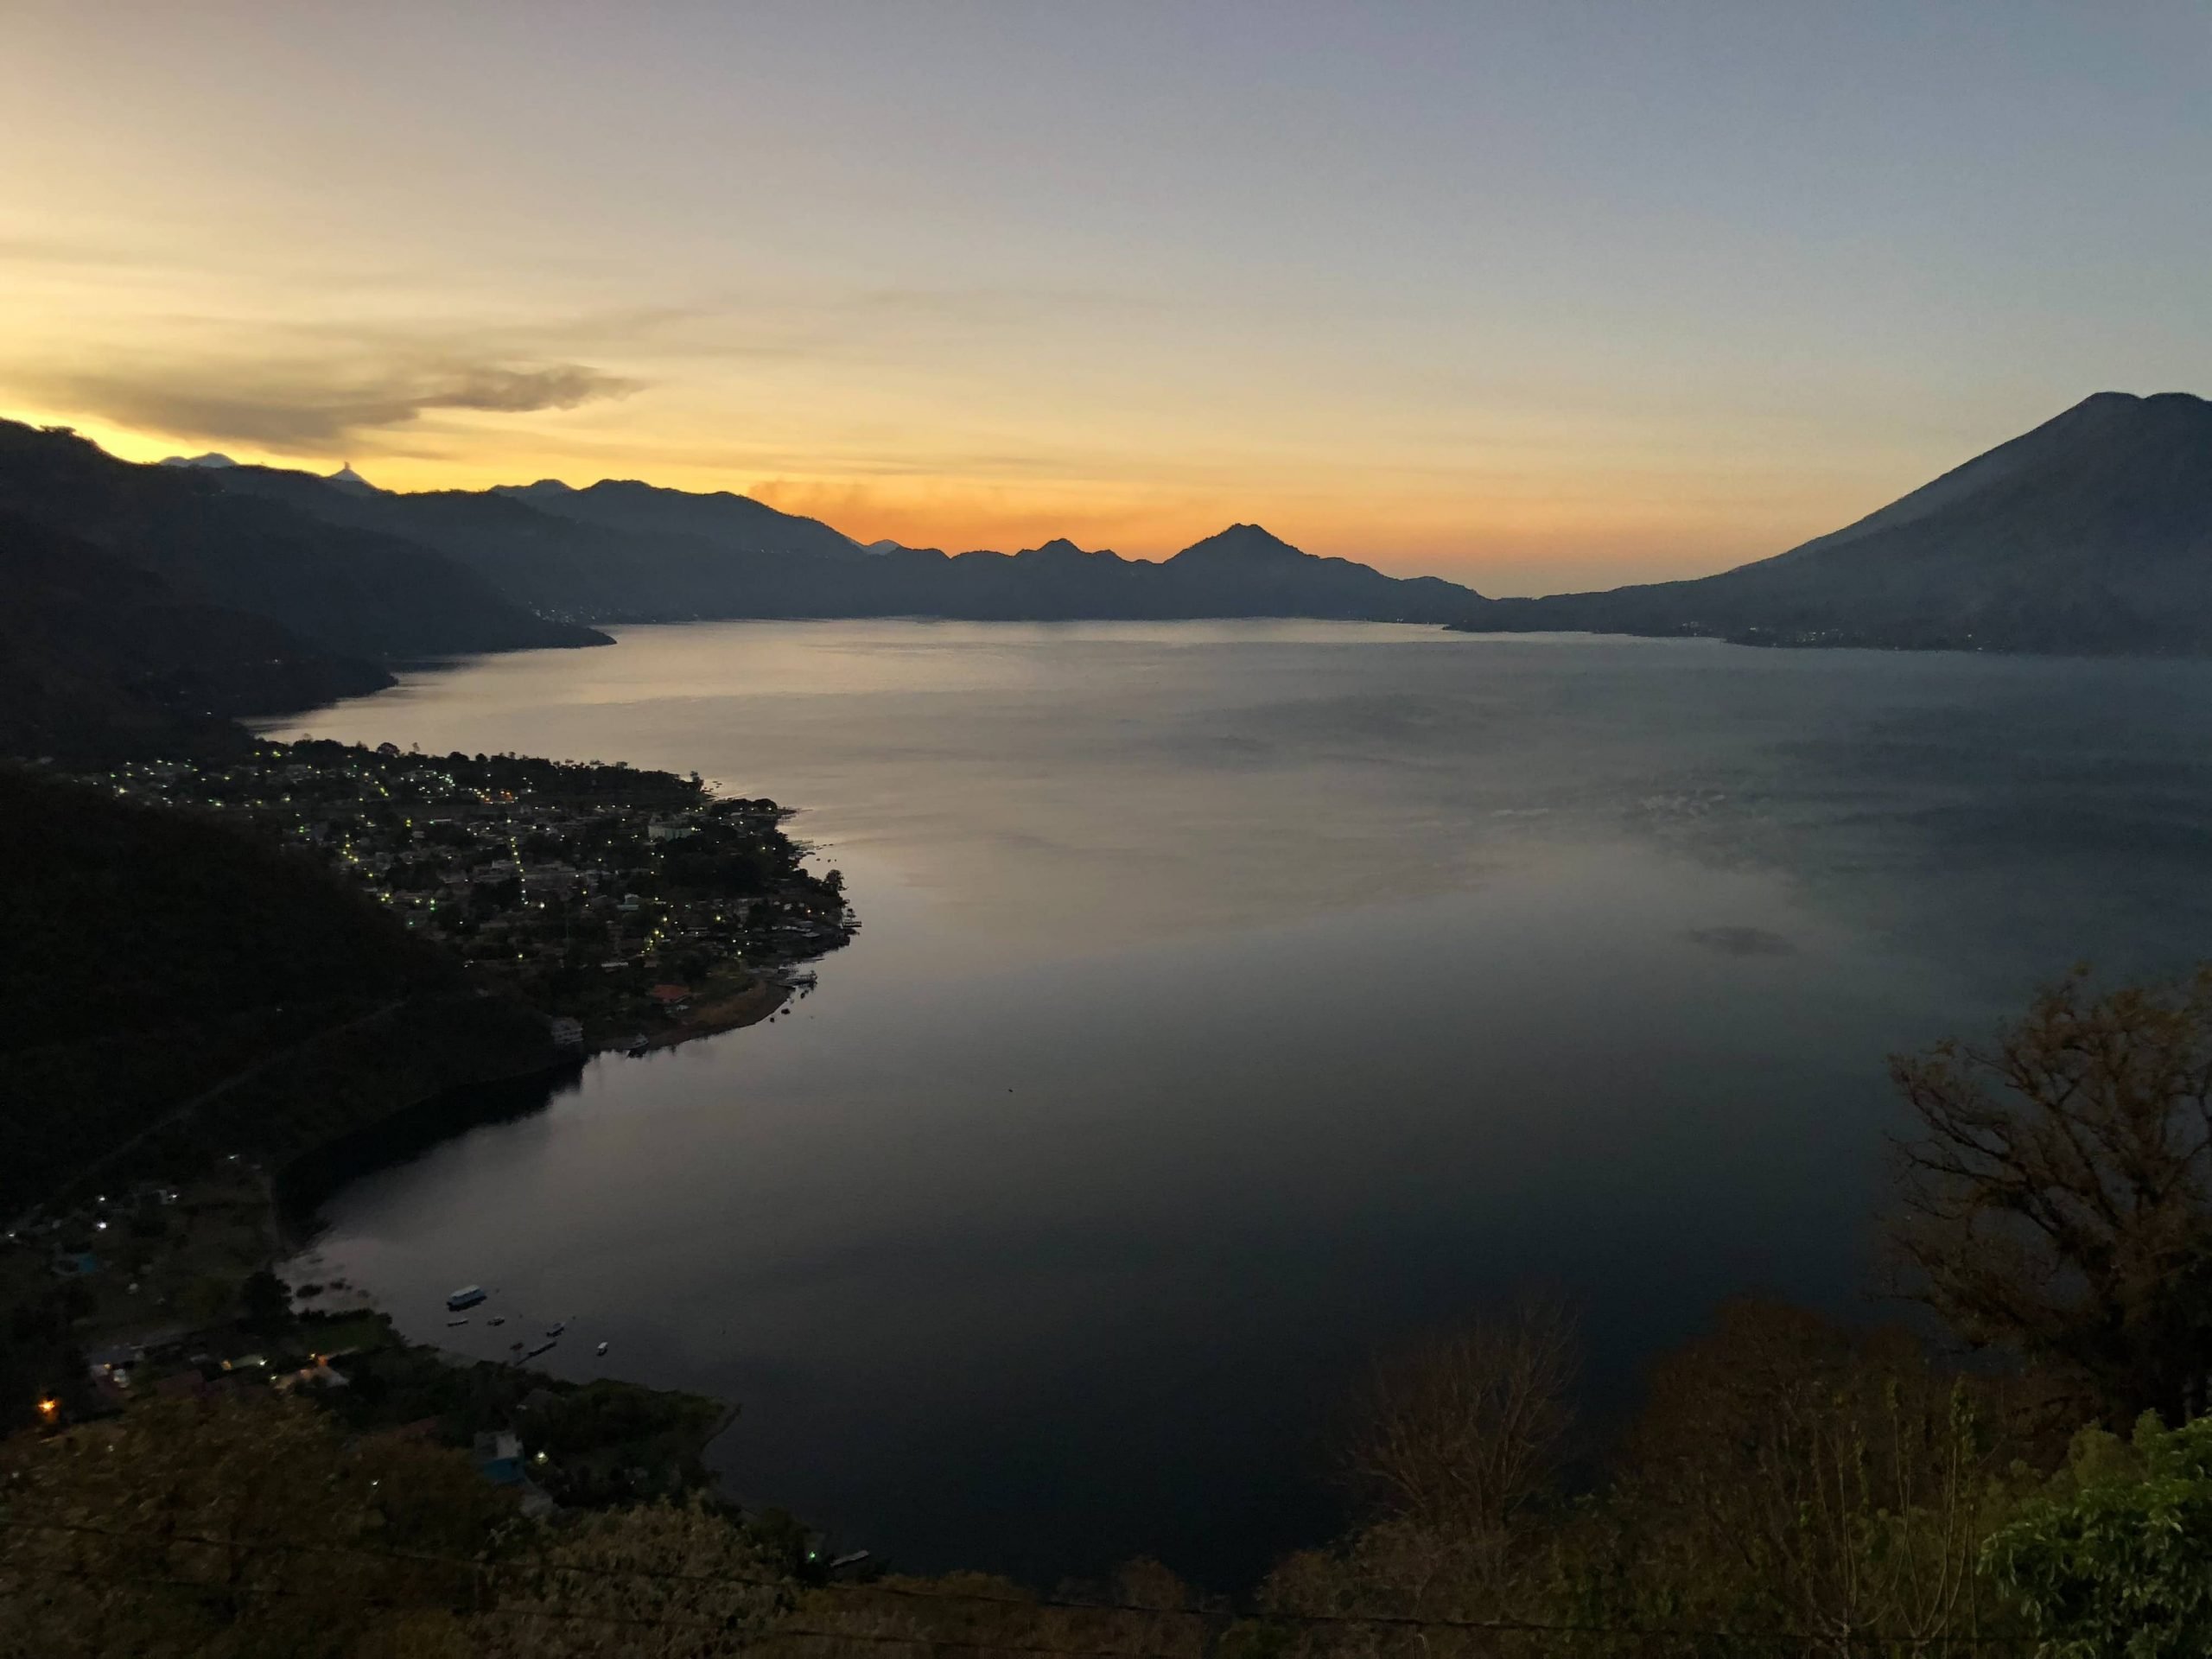 How To Get From Guatemala Airport To Lake Atitlan - All Possible Ways